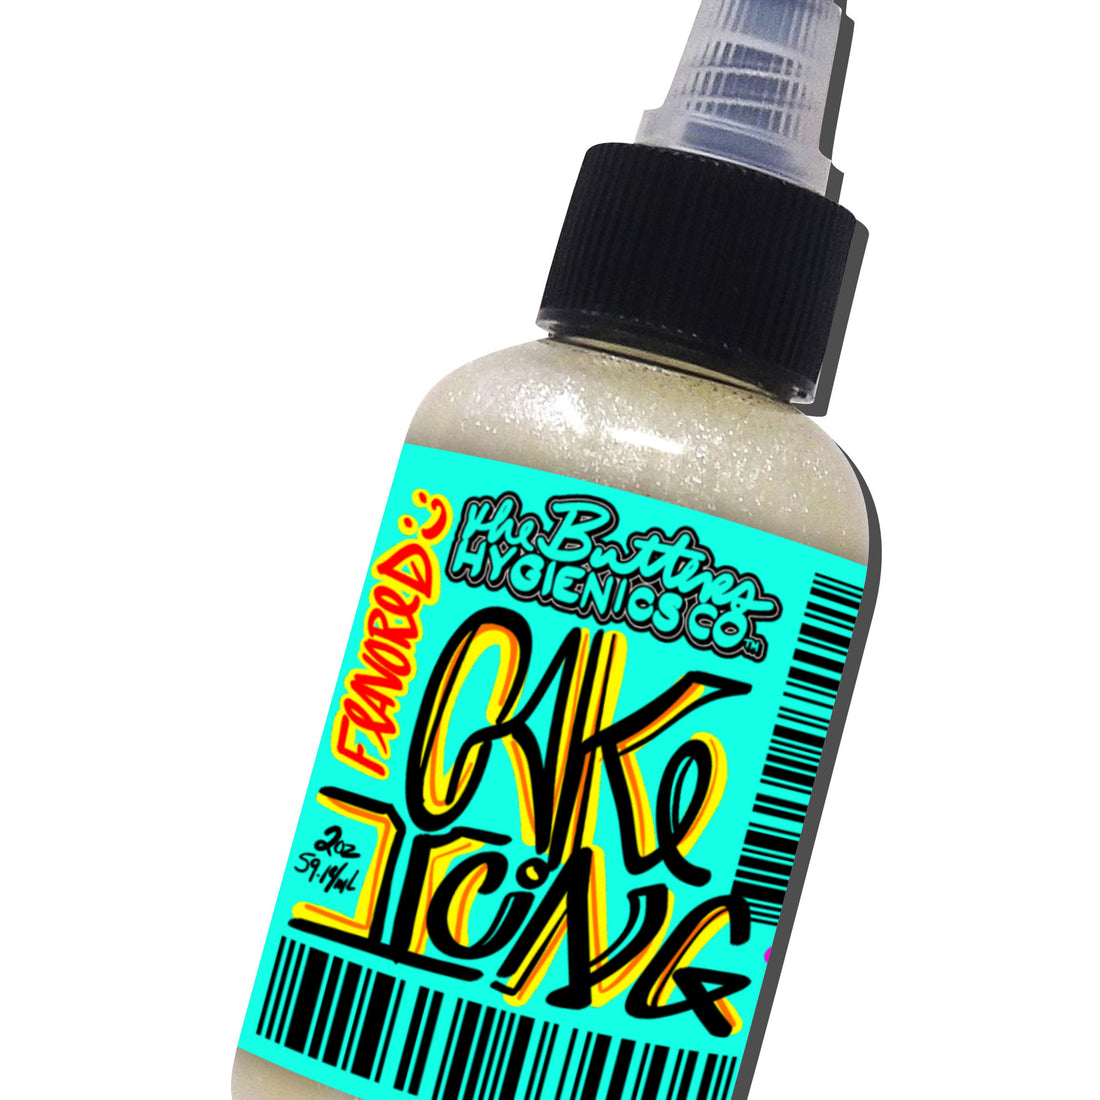 Cake Icing Body & Booty Sheen (Flavored - All Sizes) | Product Media & Descriptions